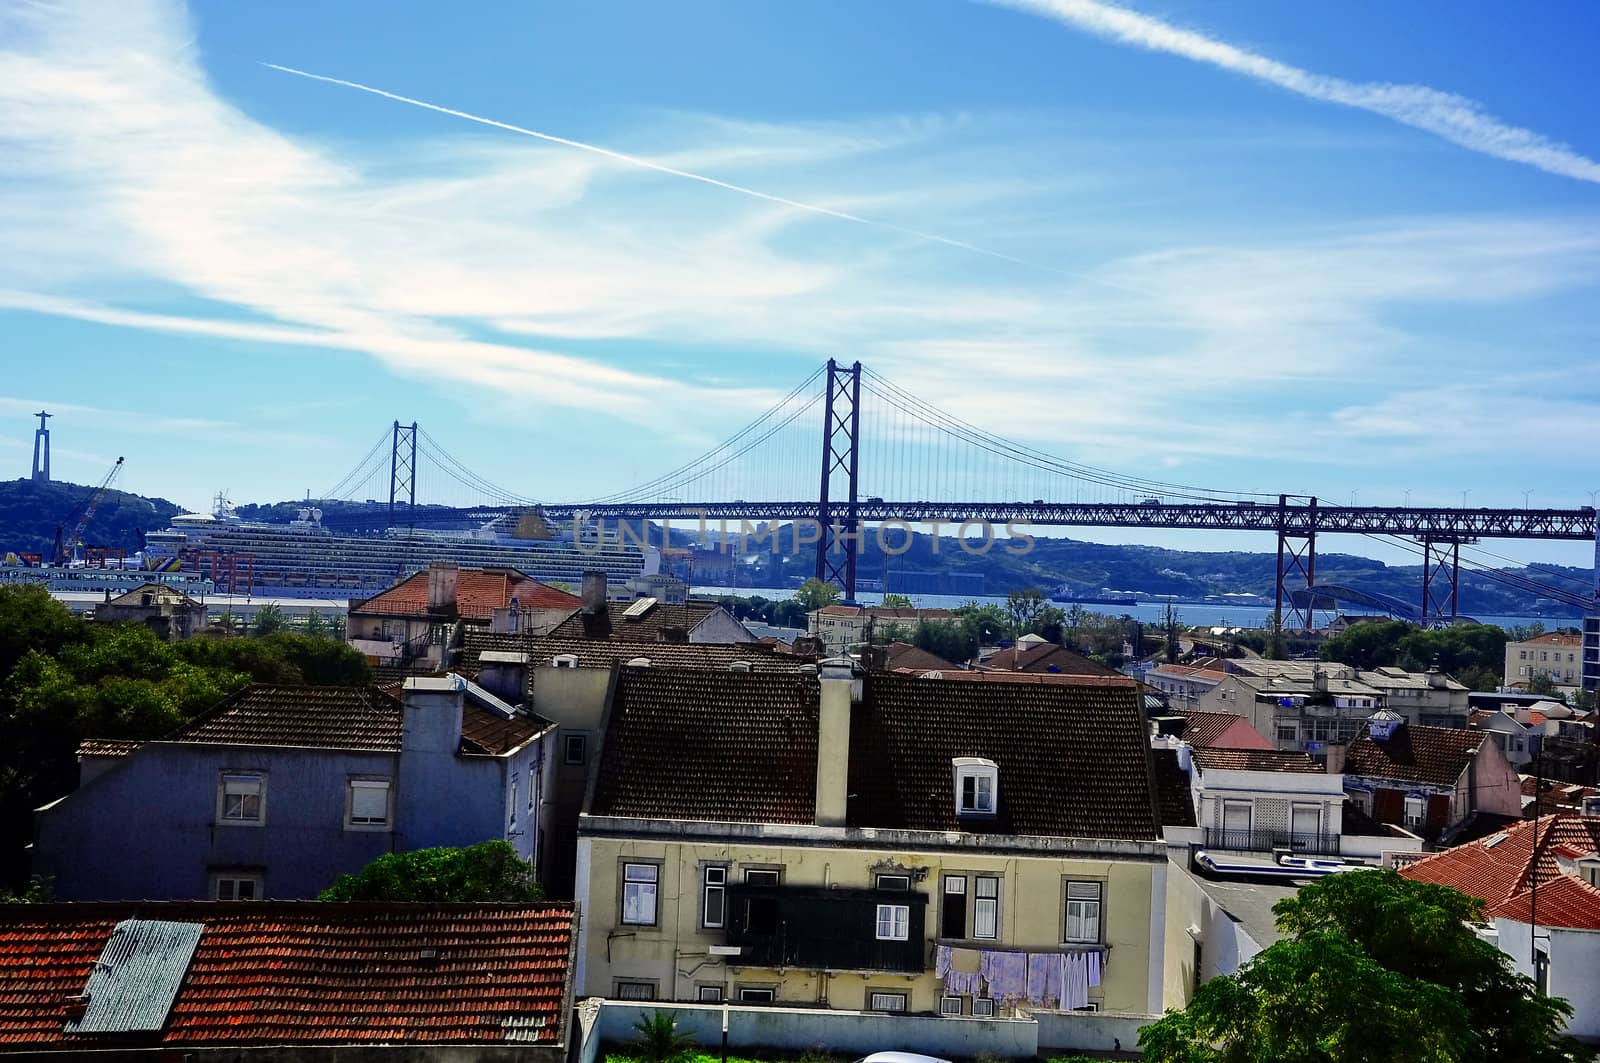 cities, portugal, architecture, lisbon, travel, old, traditional, house